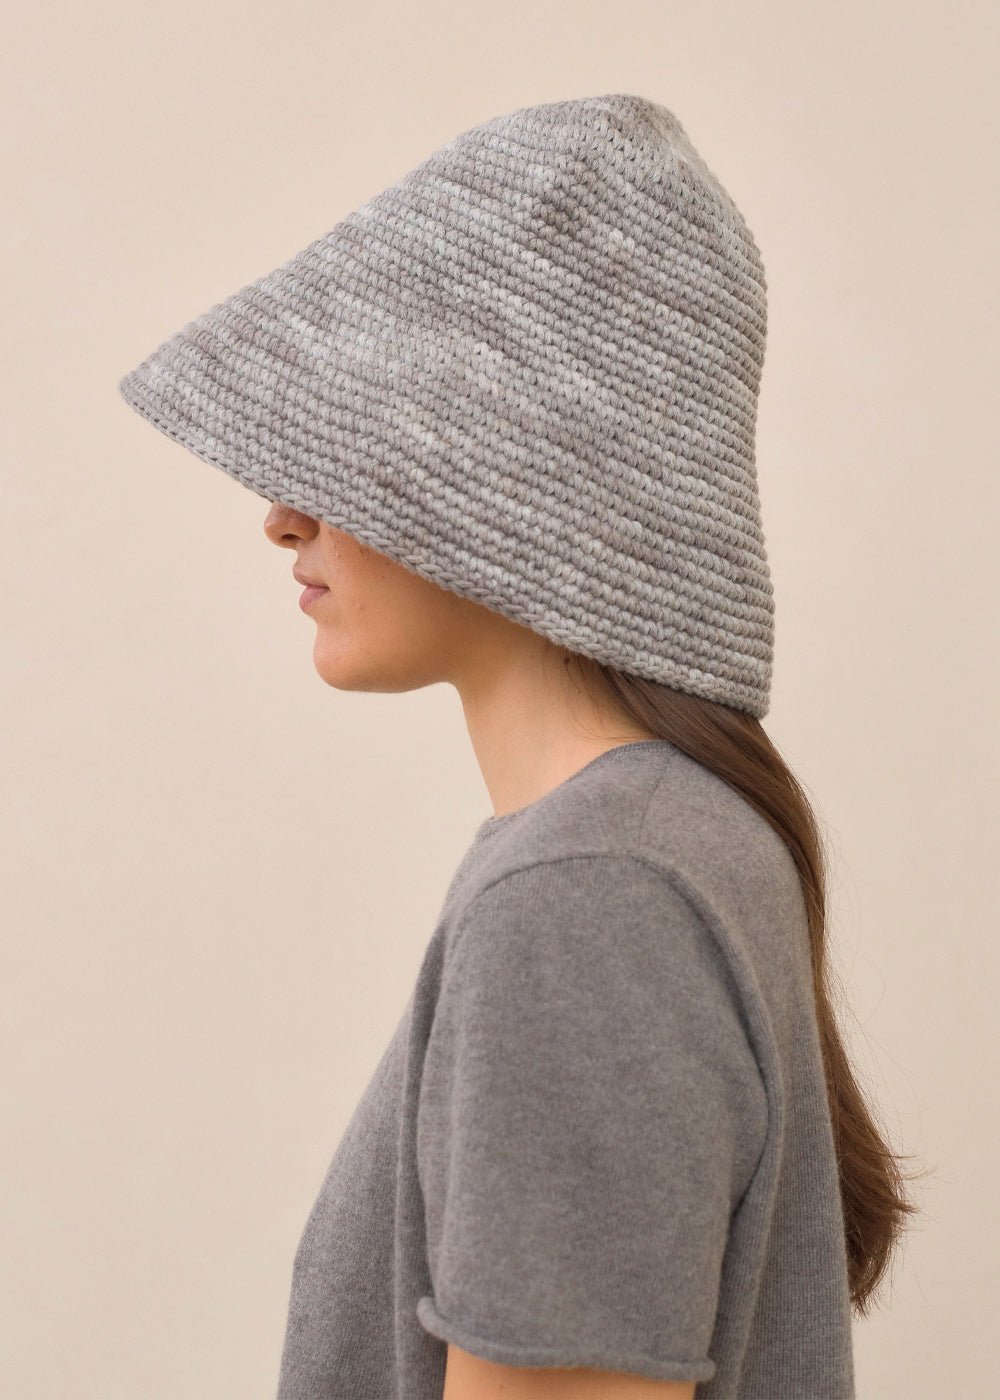 Lauren Manoogian Slate Big Bell Hat - New Classics Studios Sustainable Ethical Fashion Canada